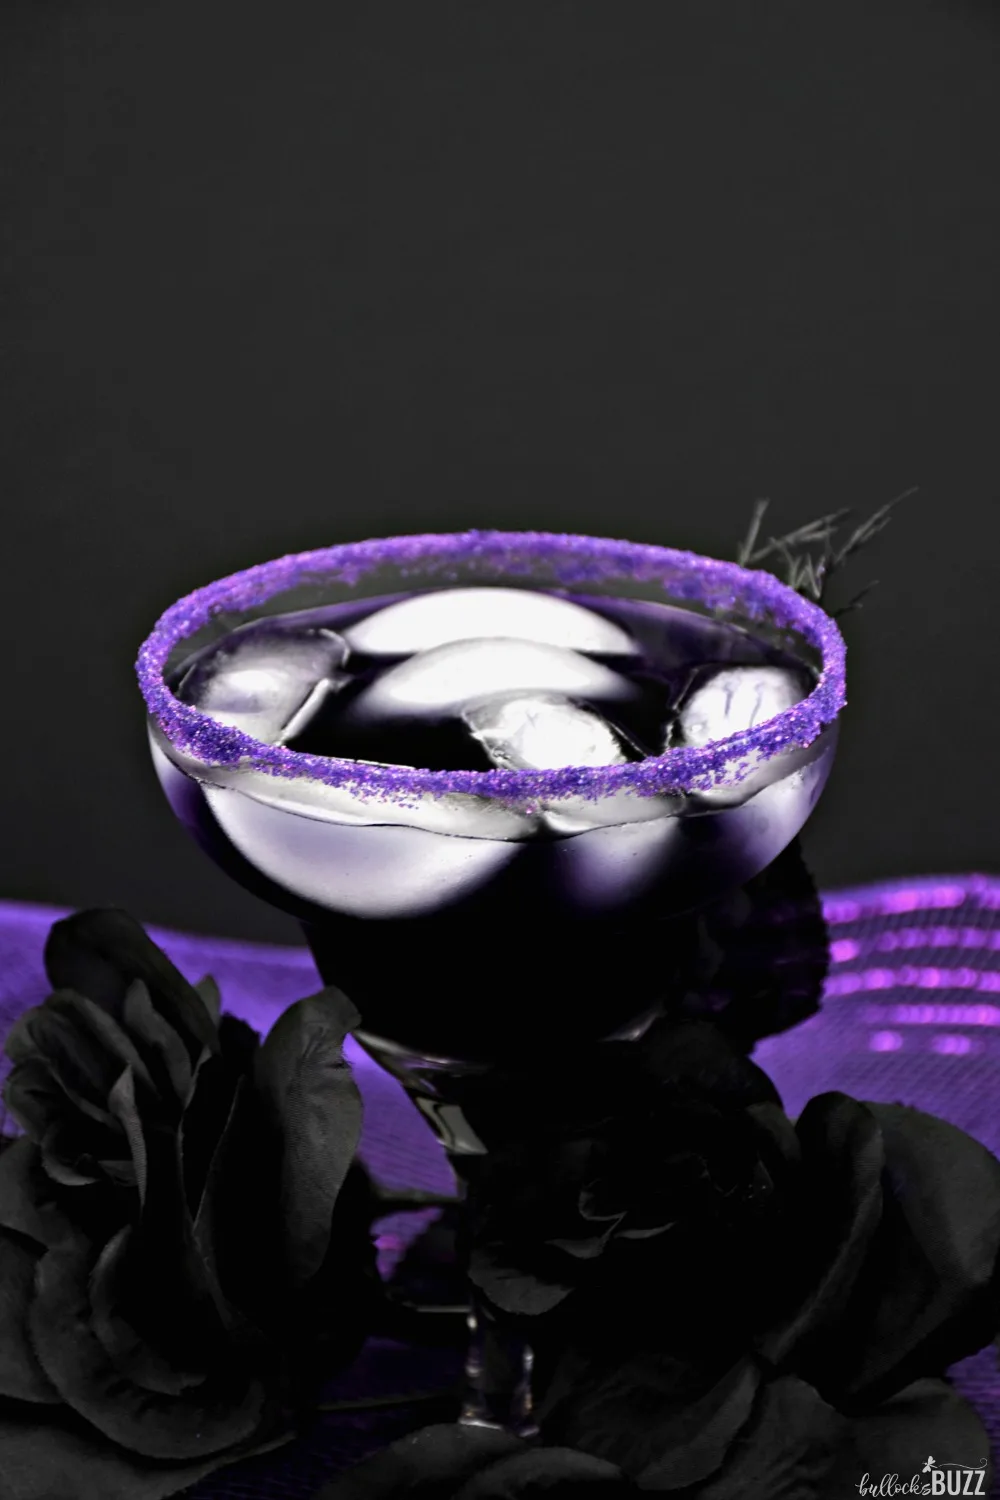 Old Hallows Eve may finally be here, but that doesn't mean the fun is dead and buried! The Magic Potion Purple Halloween Cocktail is a devilishly delicious drink that's so good, it's scary! Get the recipe on Bullock's Buzz blog.